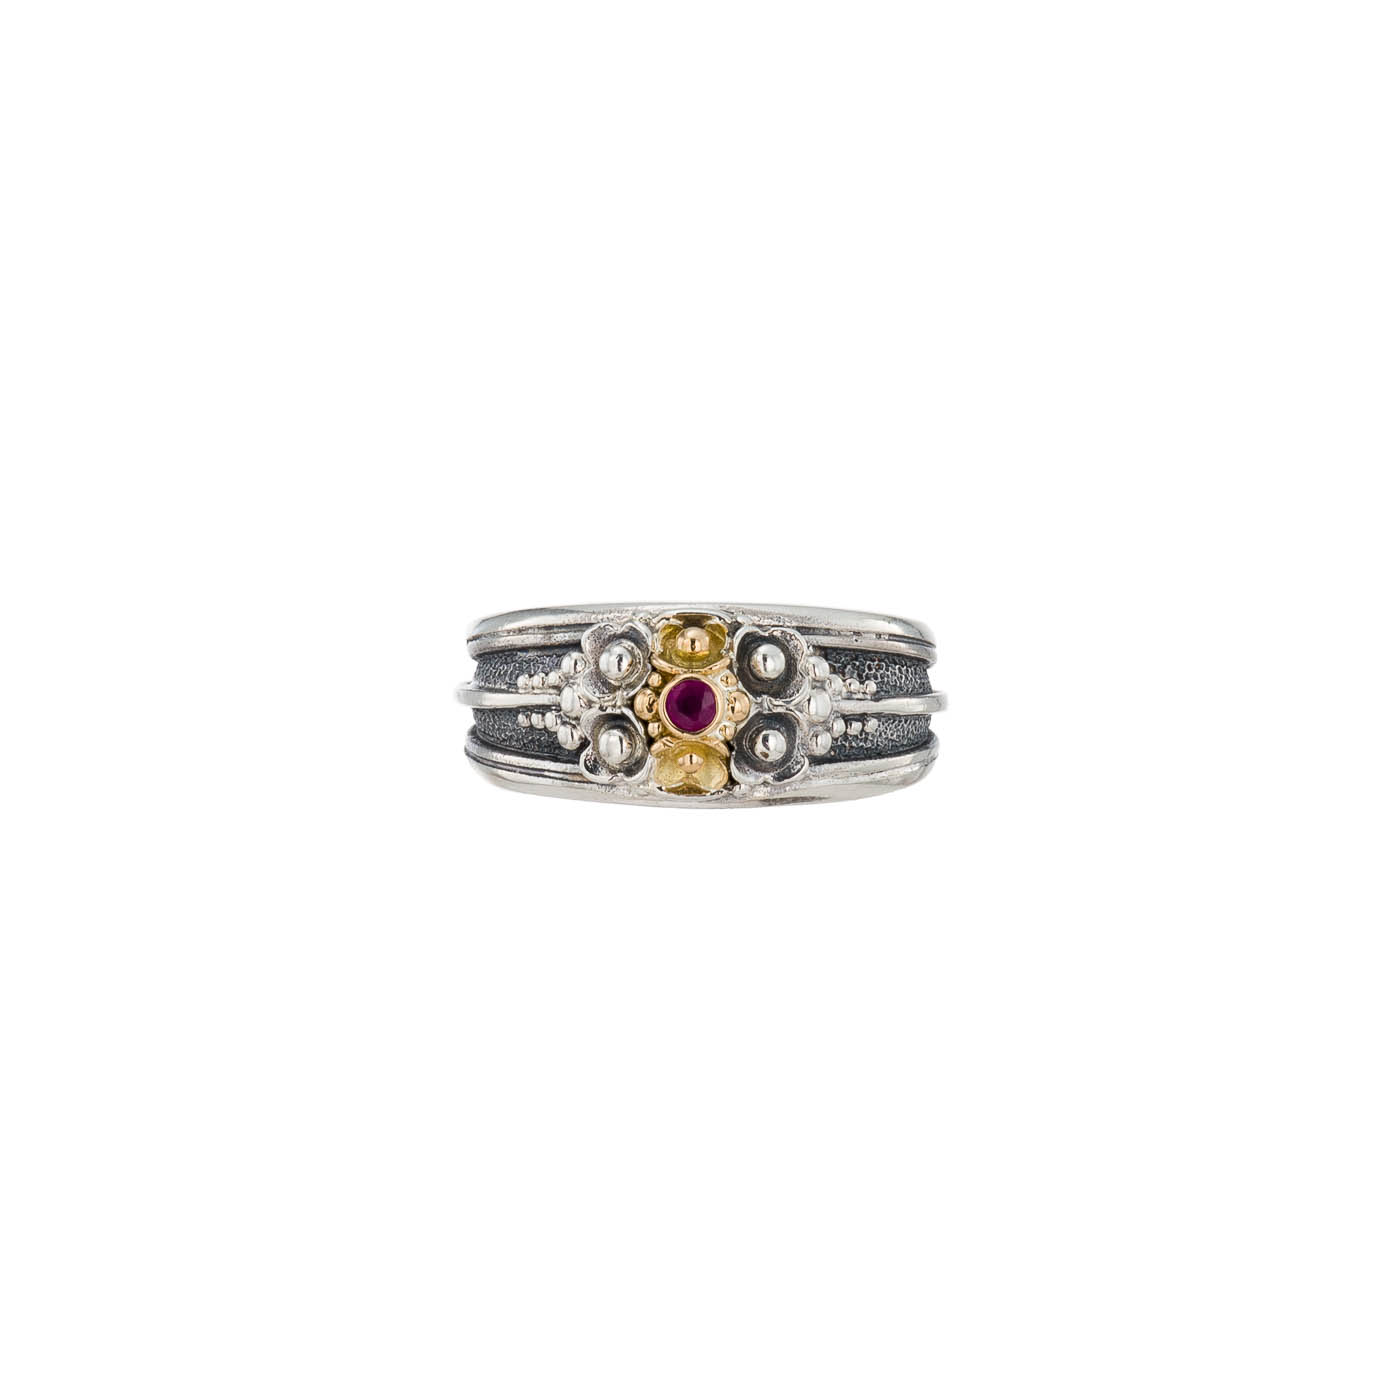 Kassandra flower ring in 18K and Sterling Silver with ruby